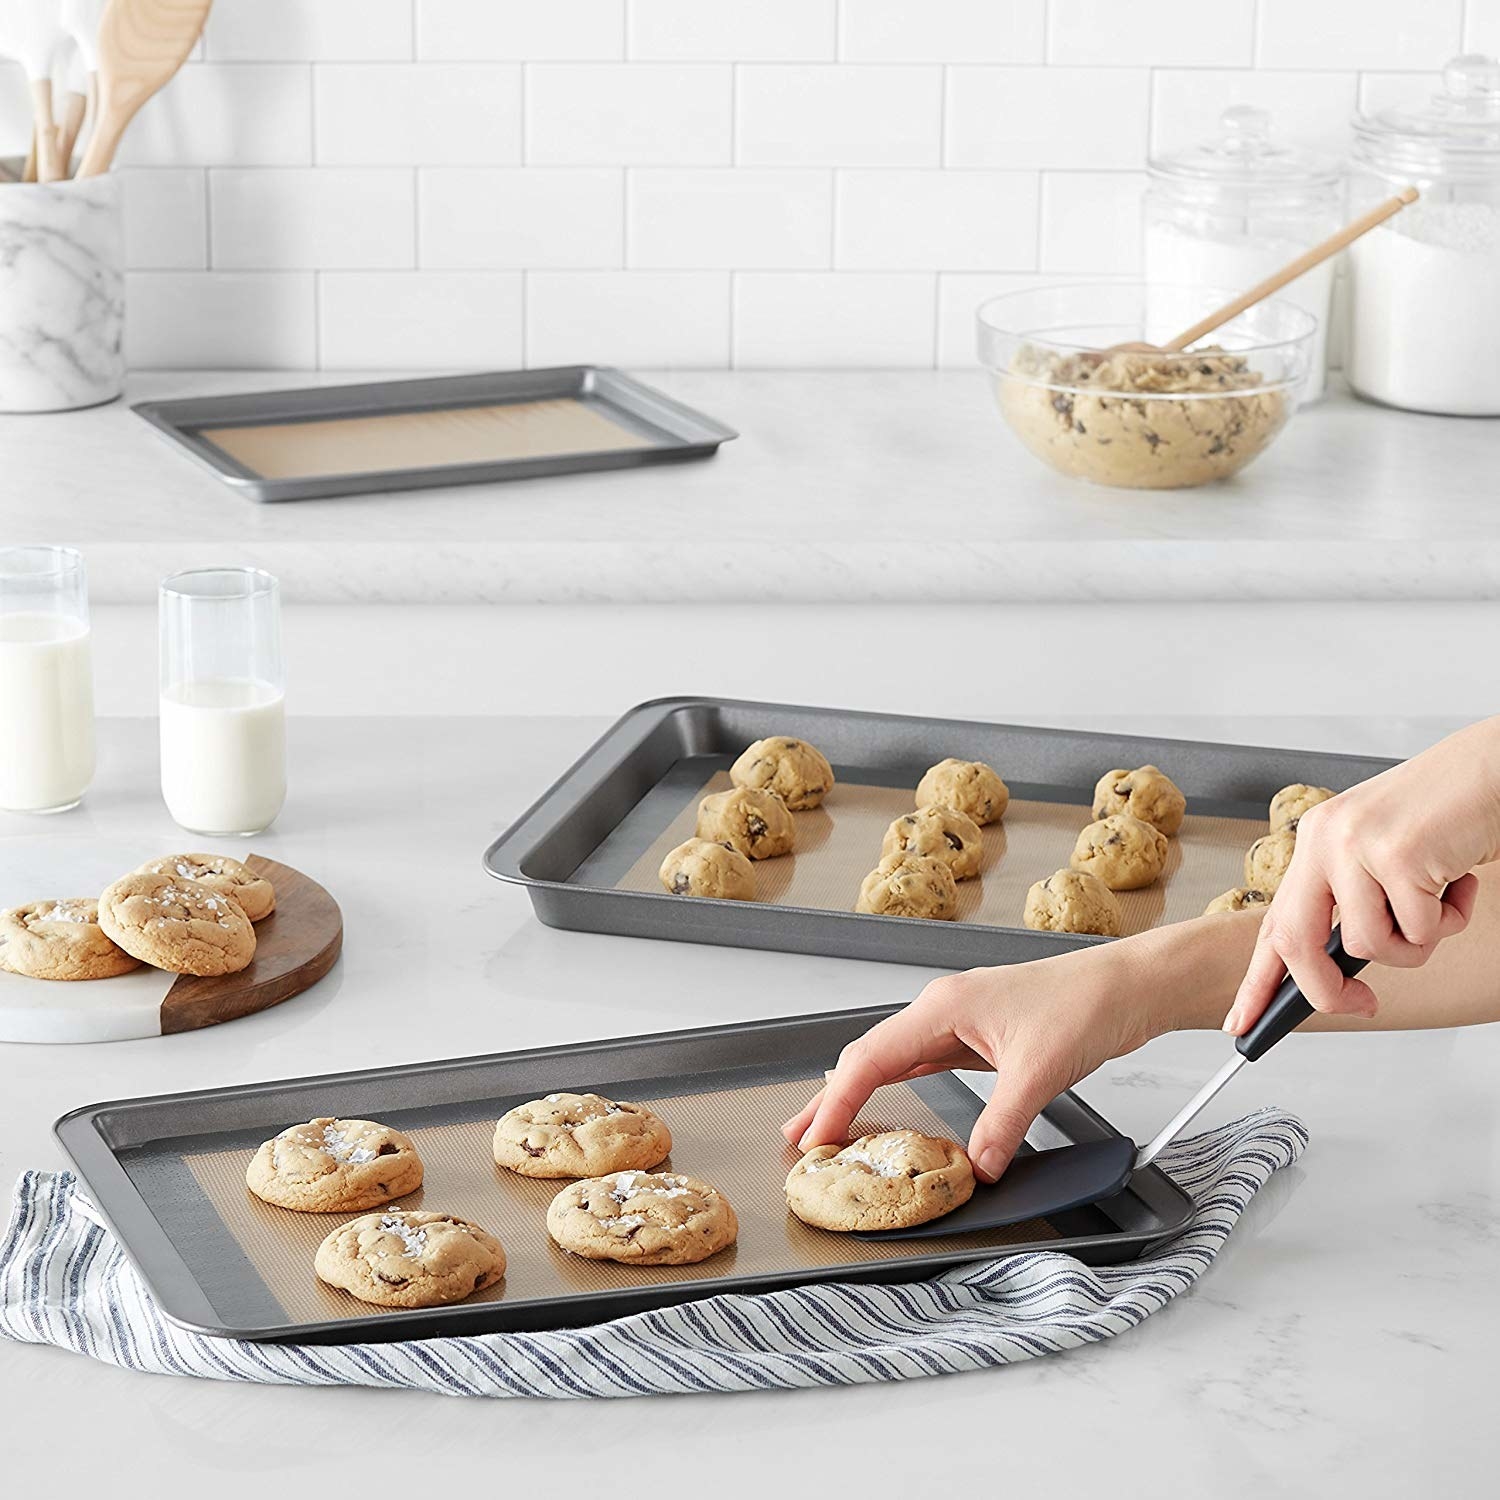 A person picking up a cookie from a baking tray with a kitchen spatula The baking tray is line with a silicone mat